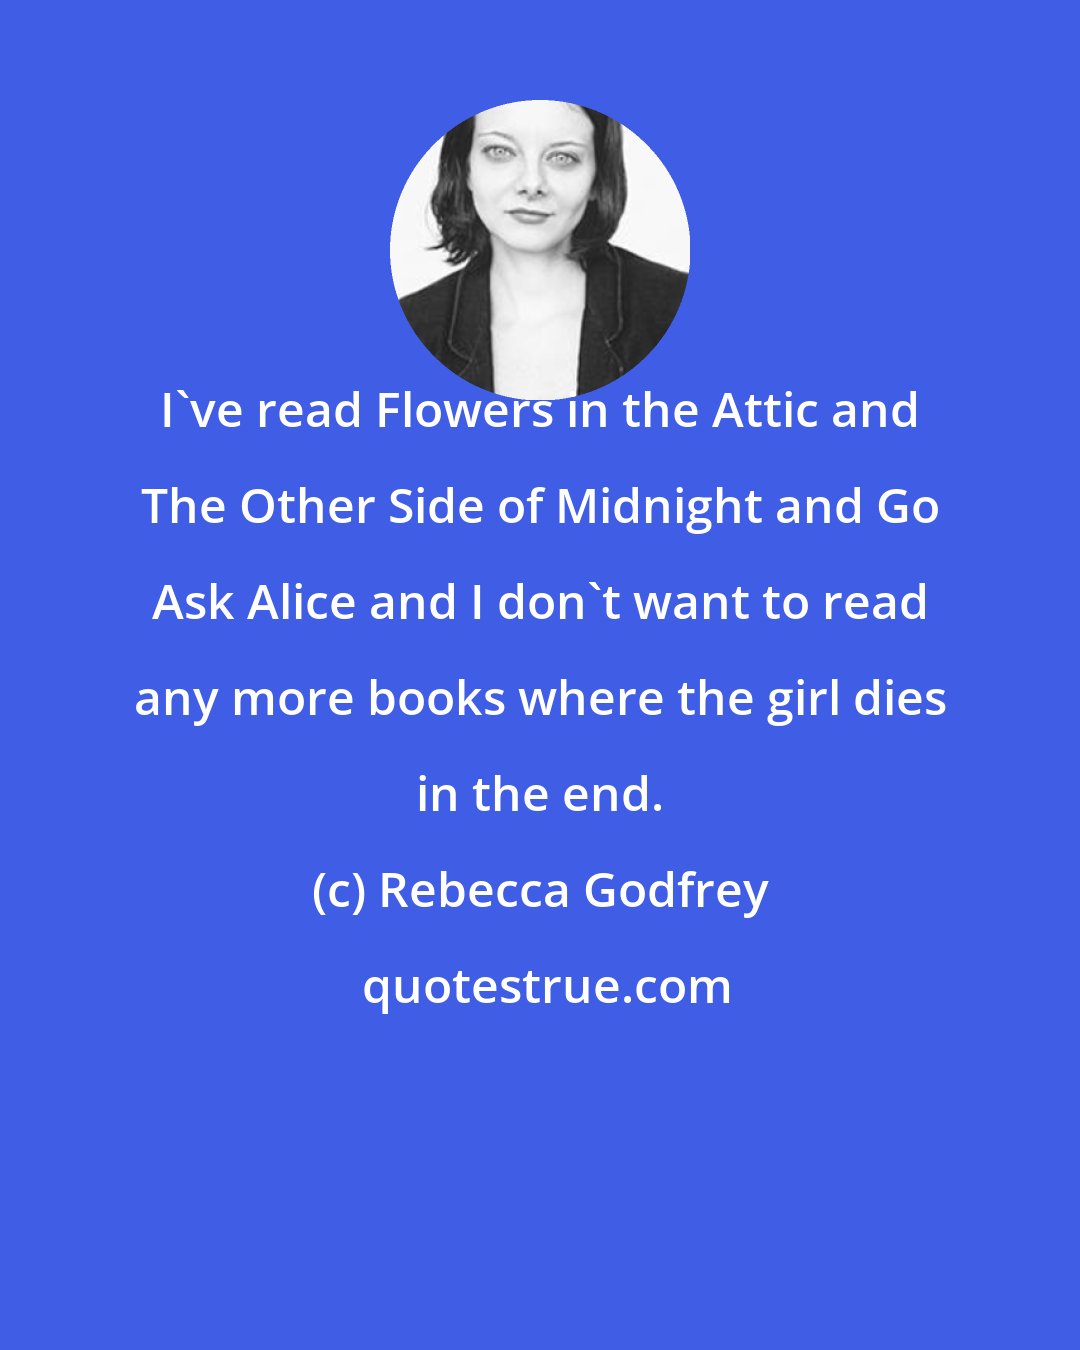 Rebecca Godfrey: I've read Flowers in the Attic and The Other Side of Midnight and Go Ask Alice and I don't want to read any more books where the girl dies in the end.